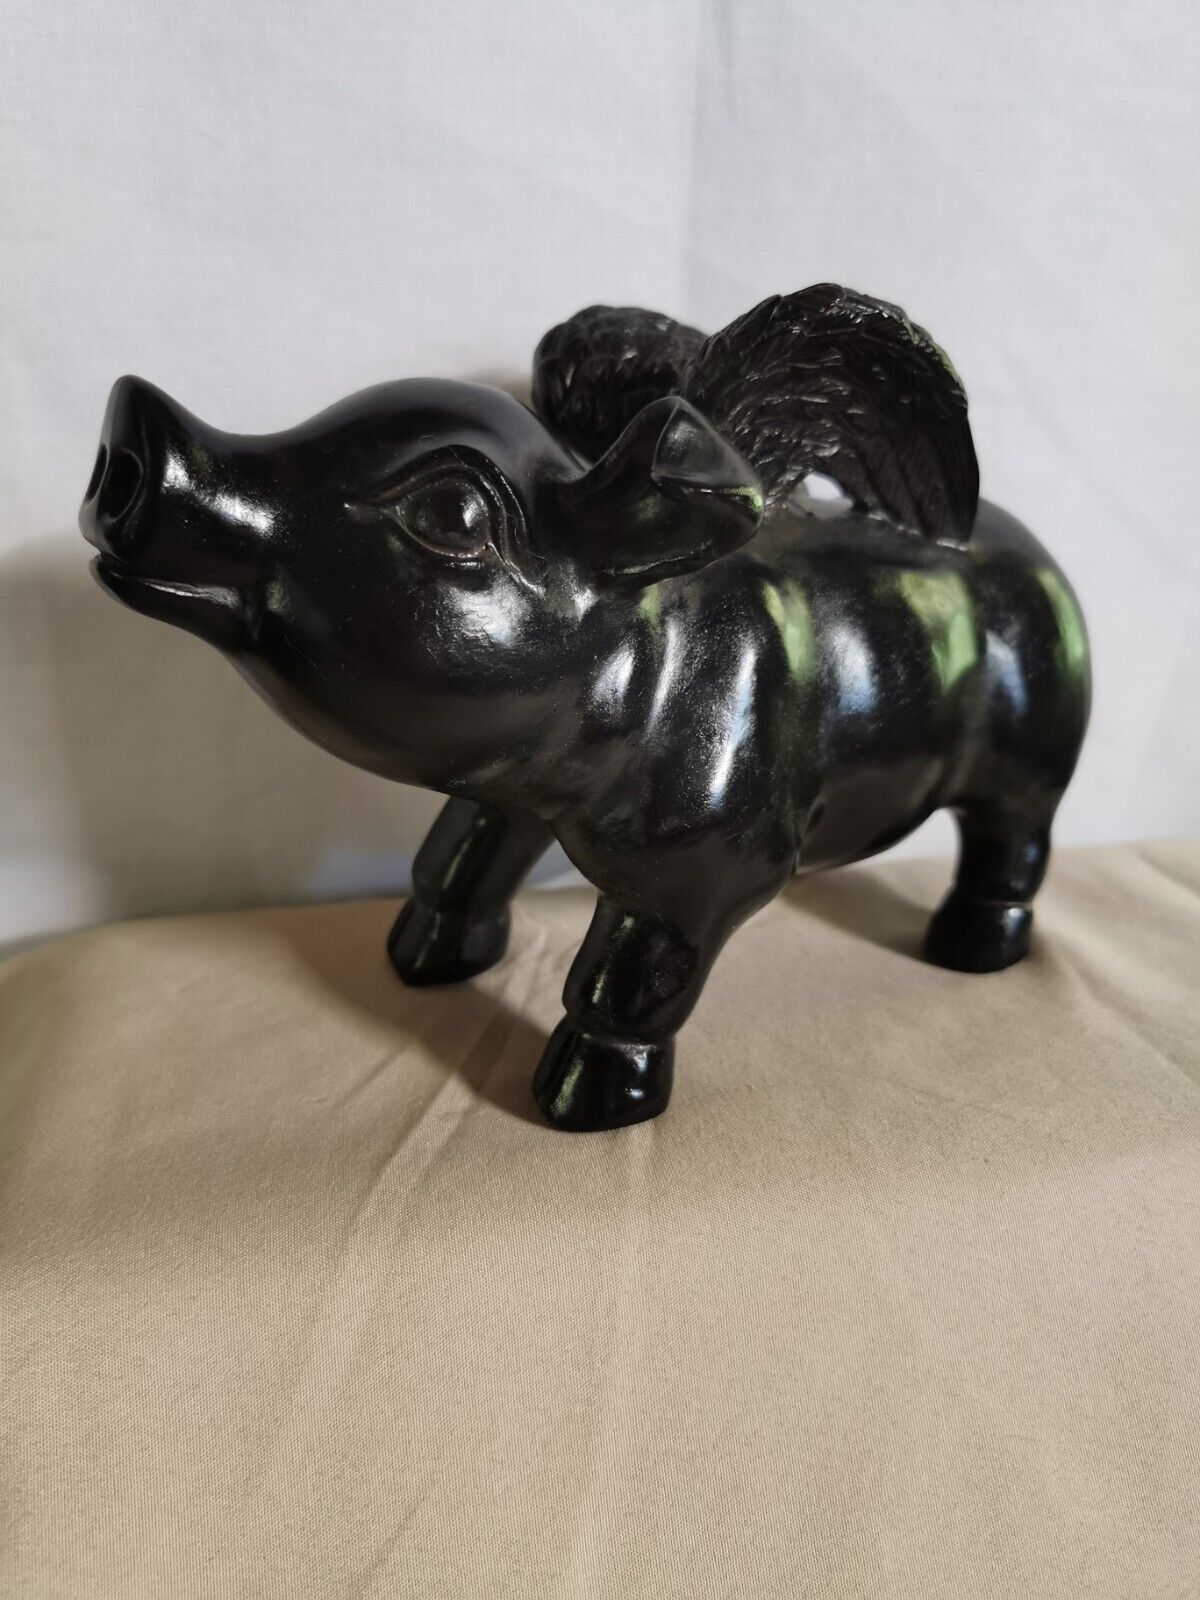 When Pigs Fly Black Resin Pig With Wings Figurine Home Or Office Desk Decor 5x8